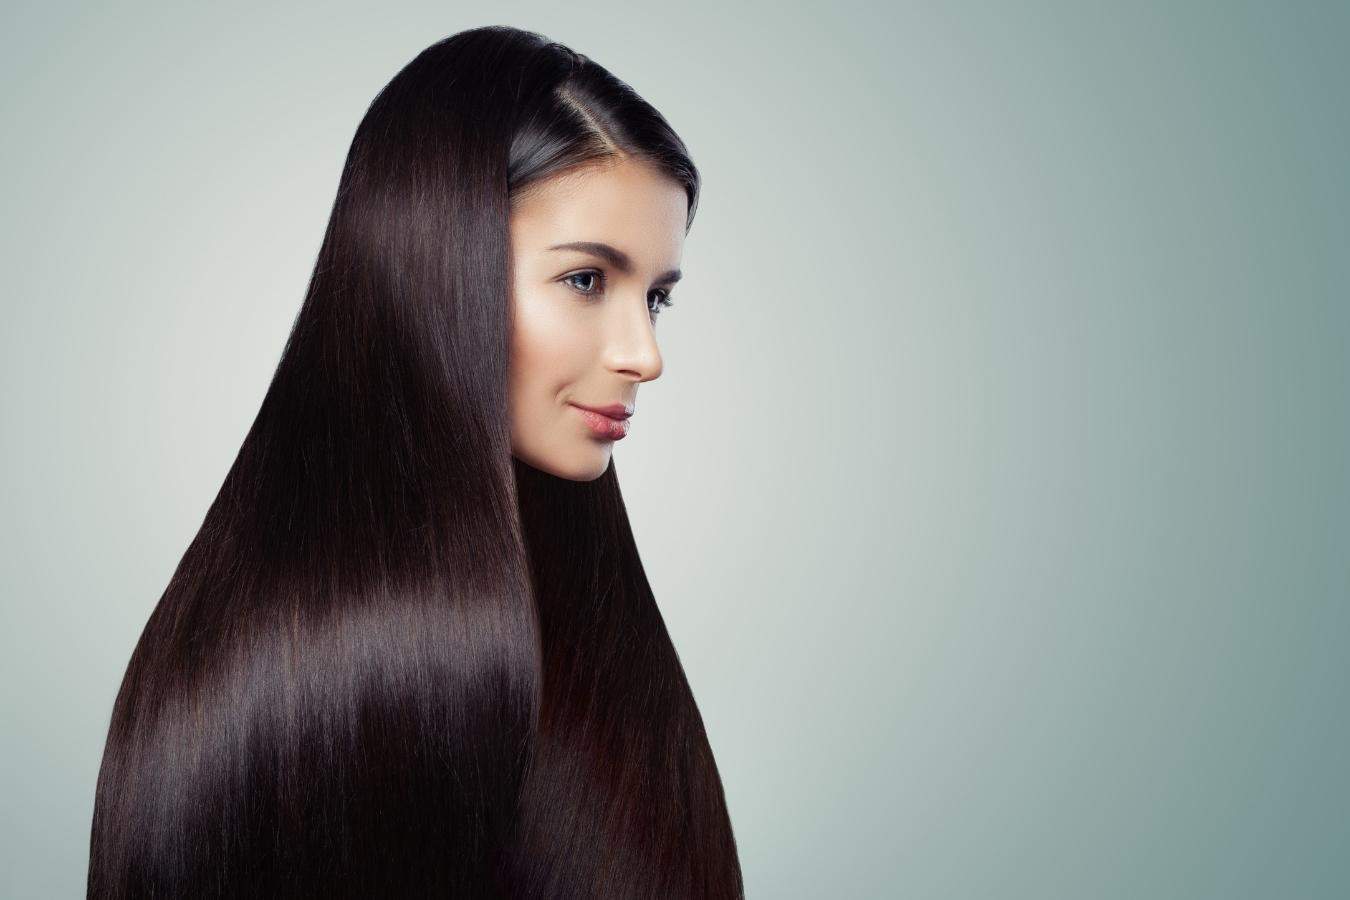 Is the Kebelo Smoothing System good for your hair